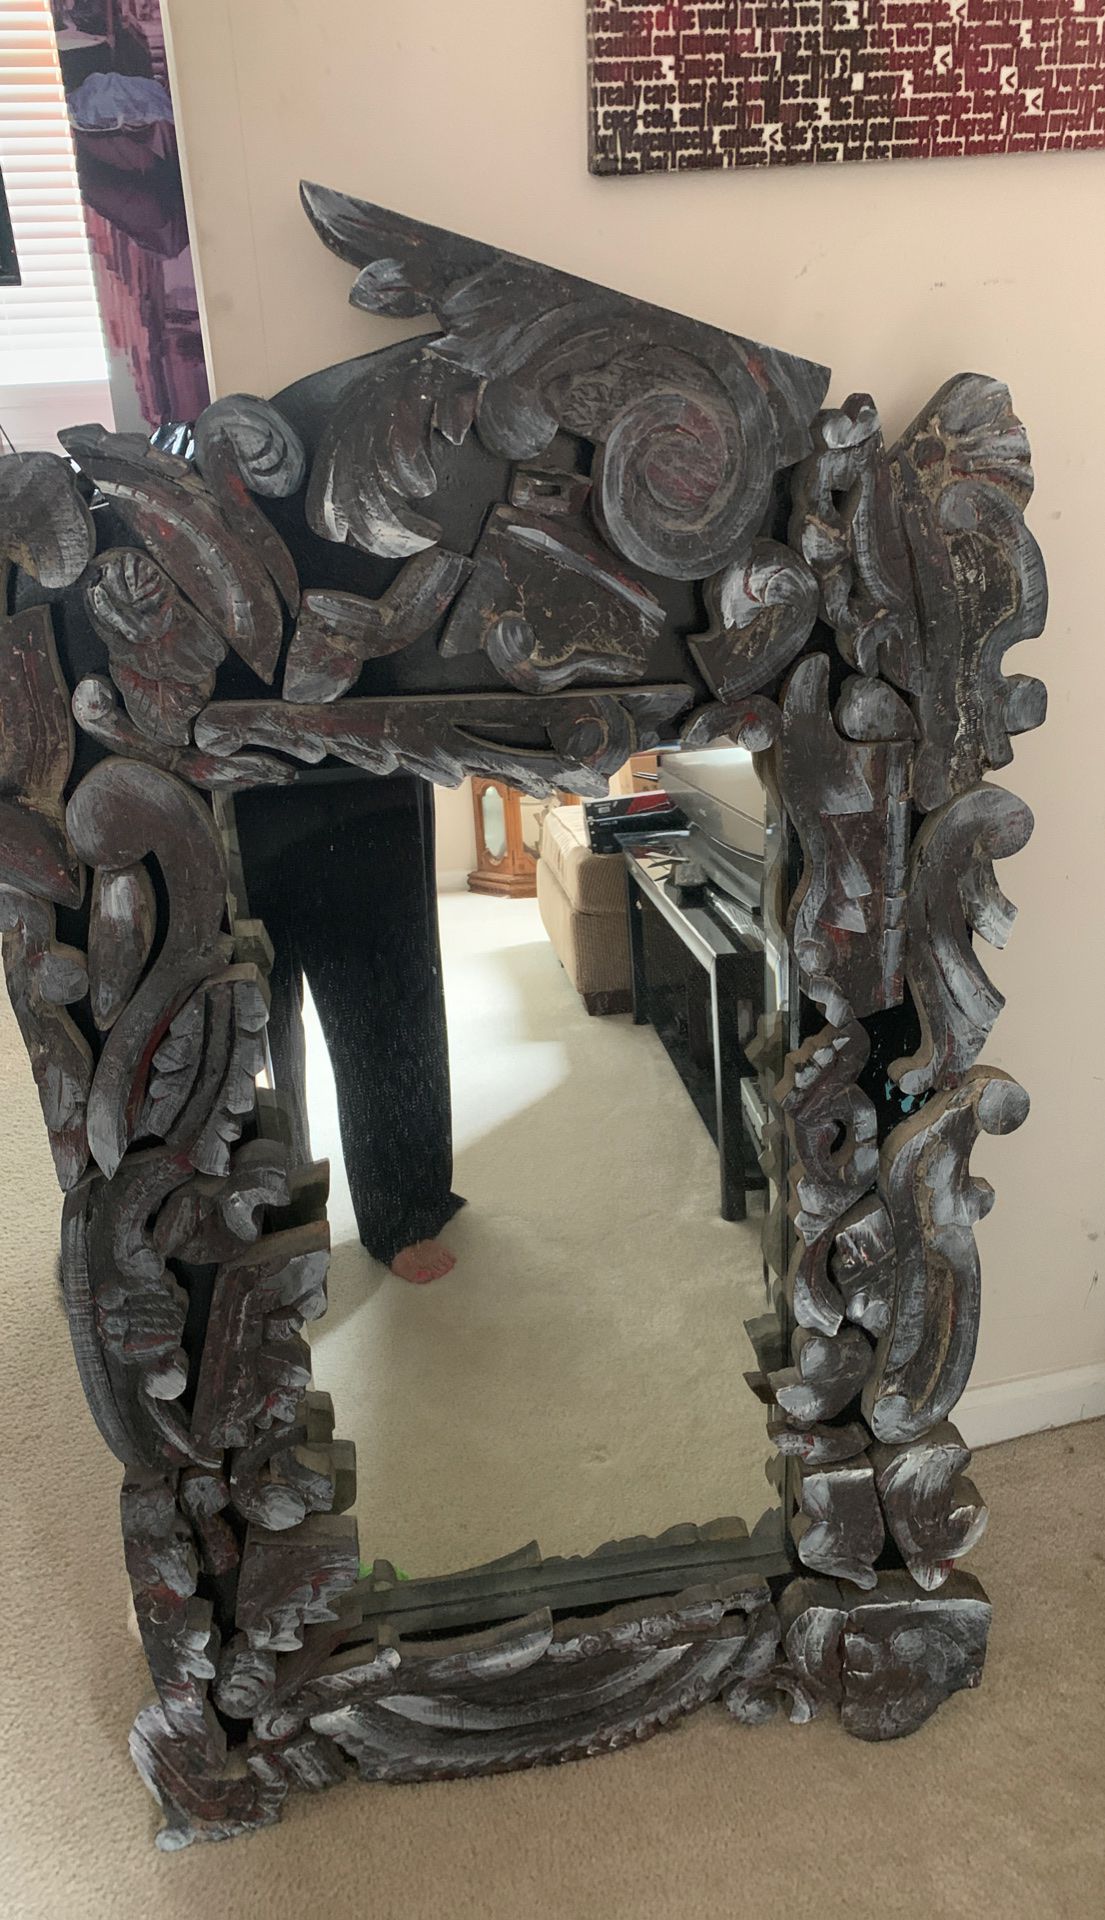 Hand carved wood mirror. I don’t know the origin or where it was bought originally, but it is beautiful.